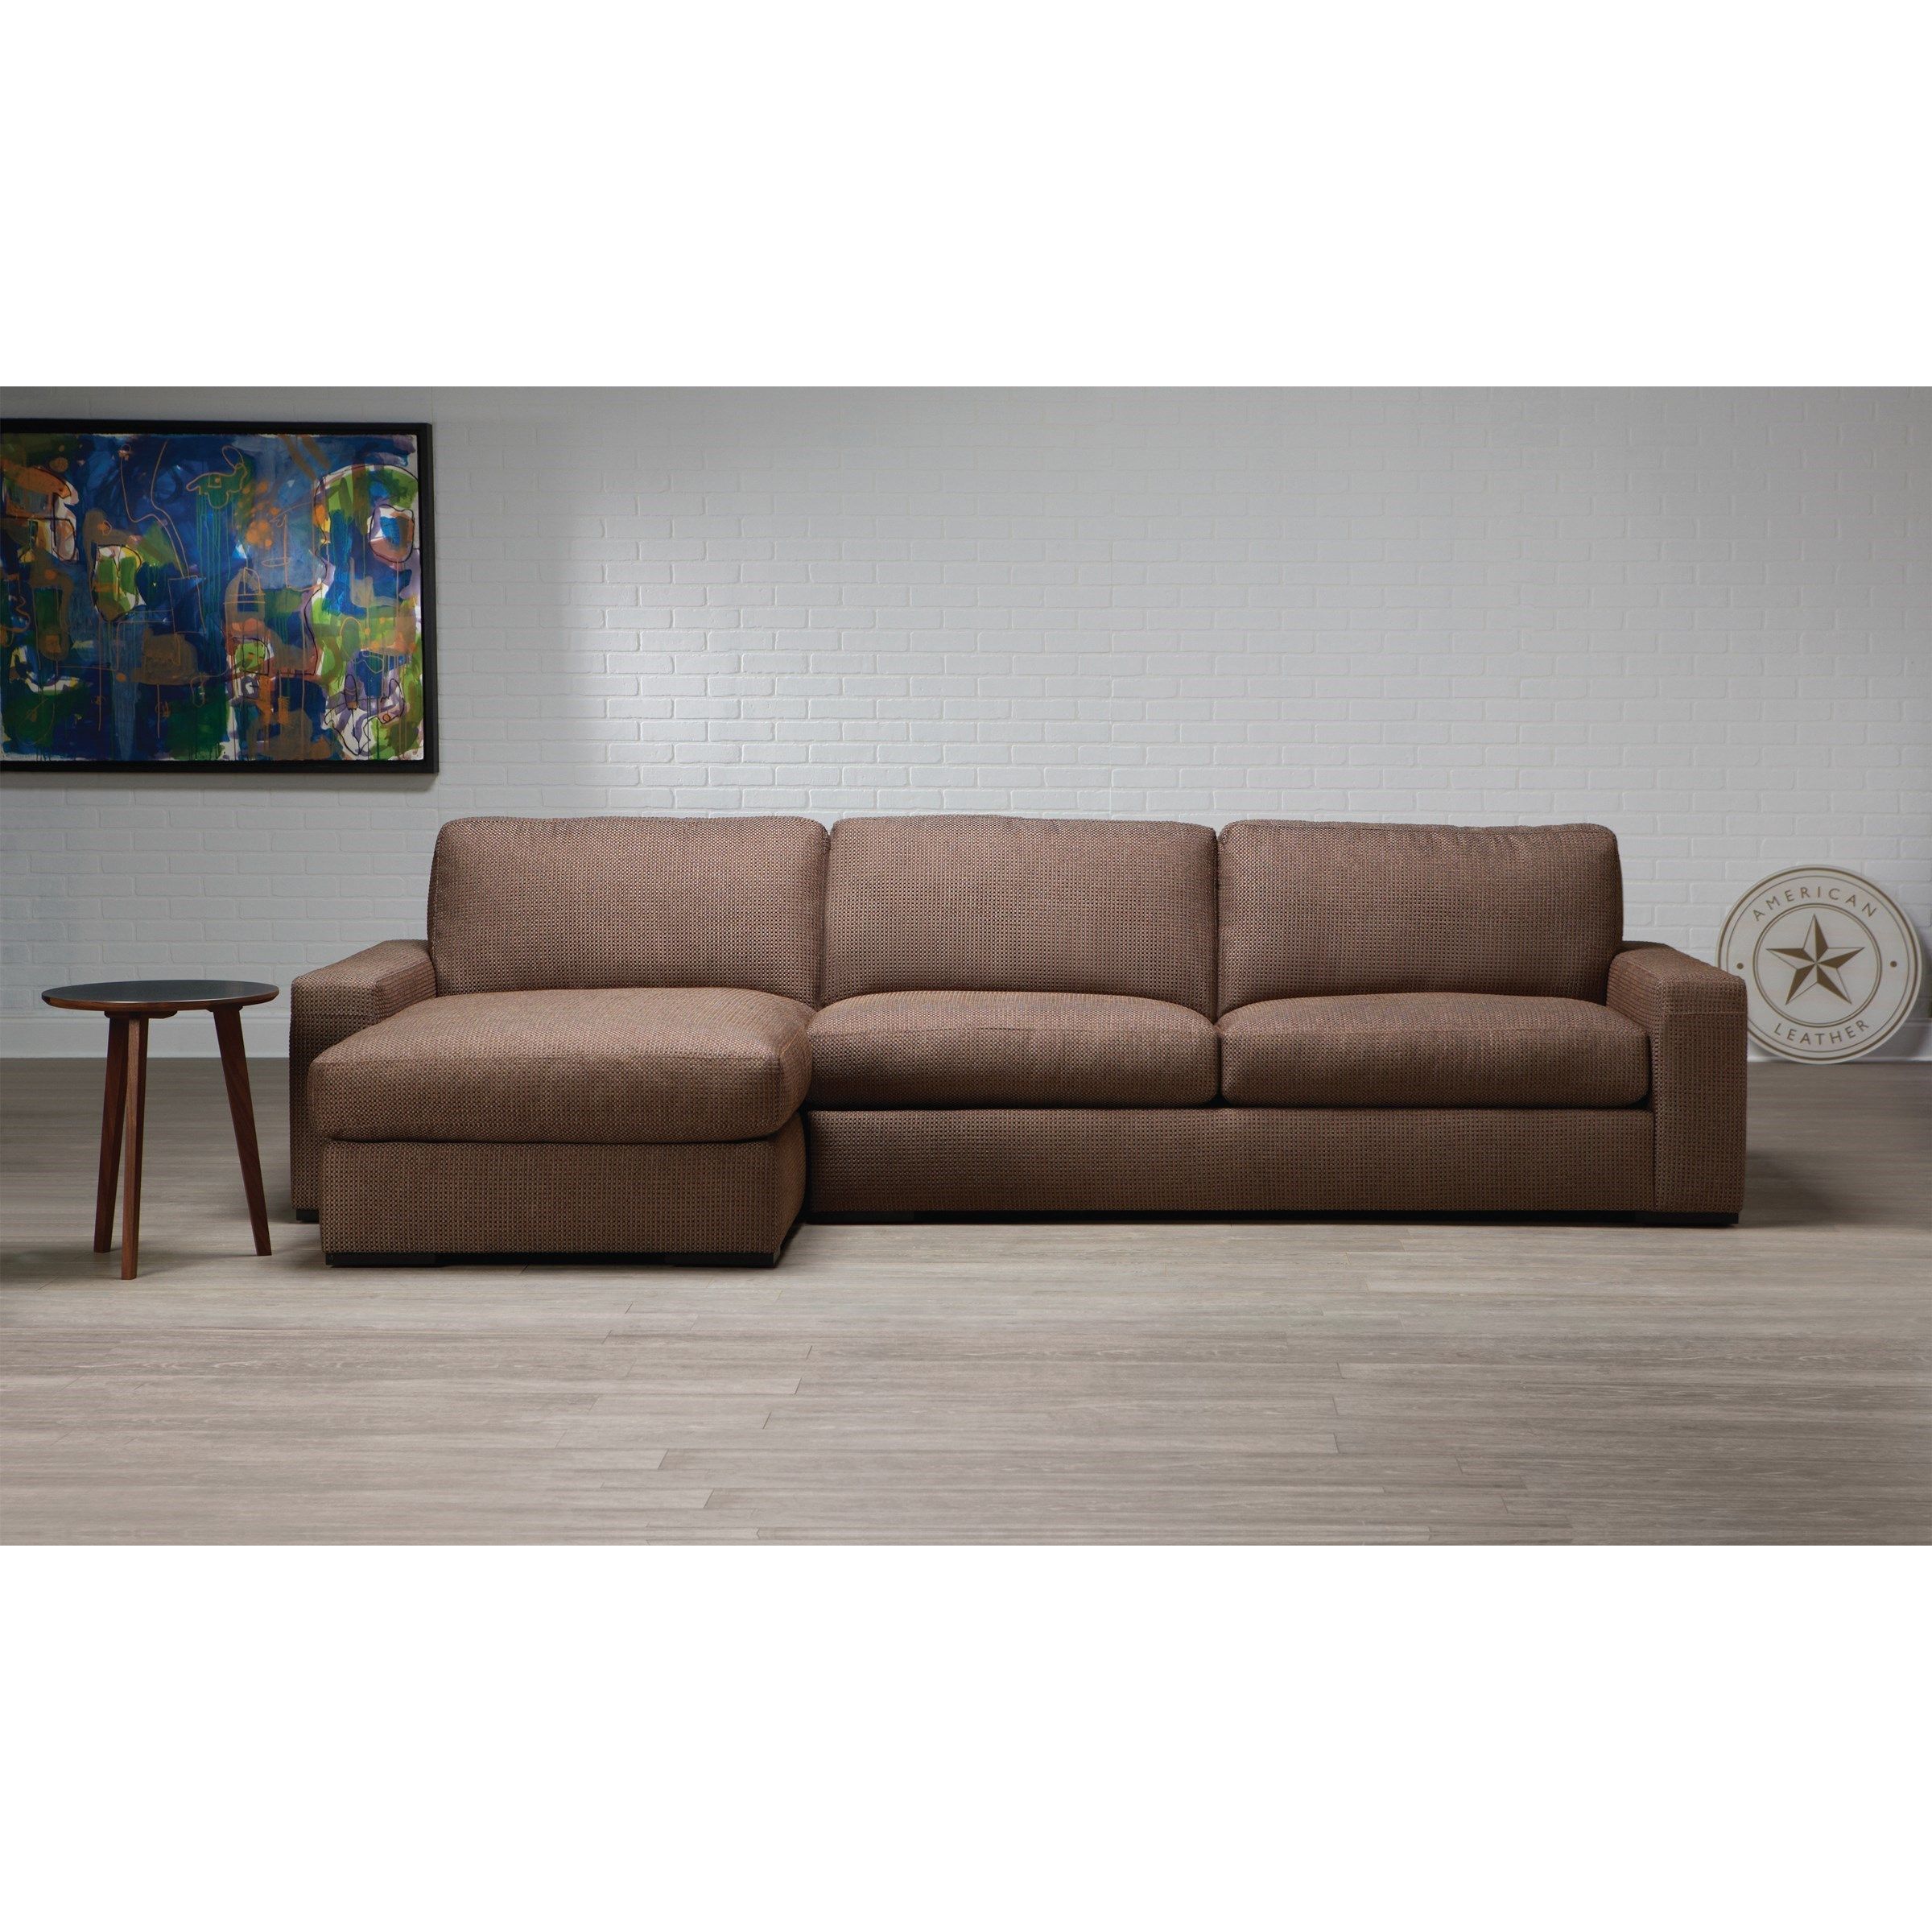 American Leather Westchester Contemporary 2 Piece Throughout 2pc Connel Modern Chaise Sectional Sofas Black (View 11 of 15)